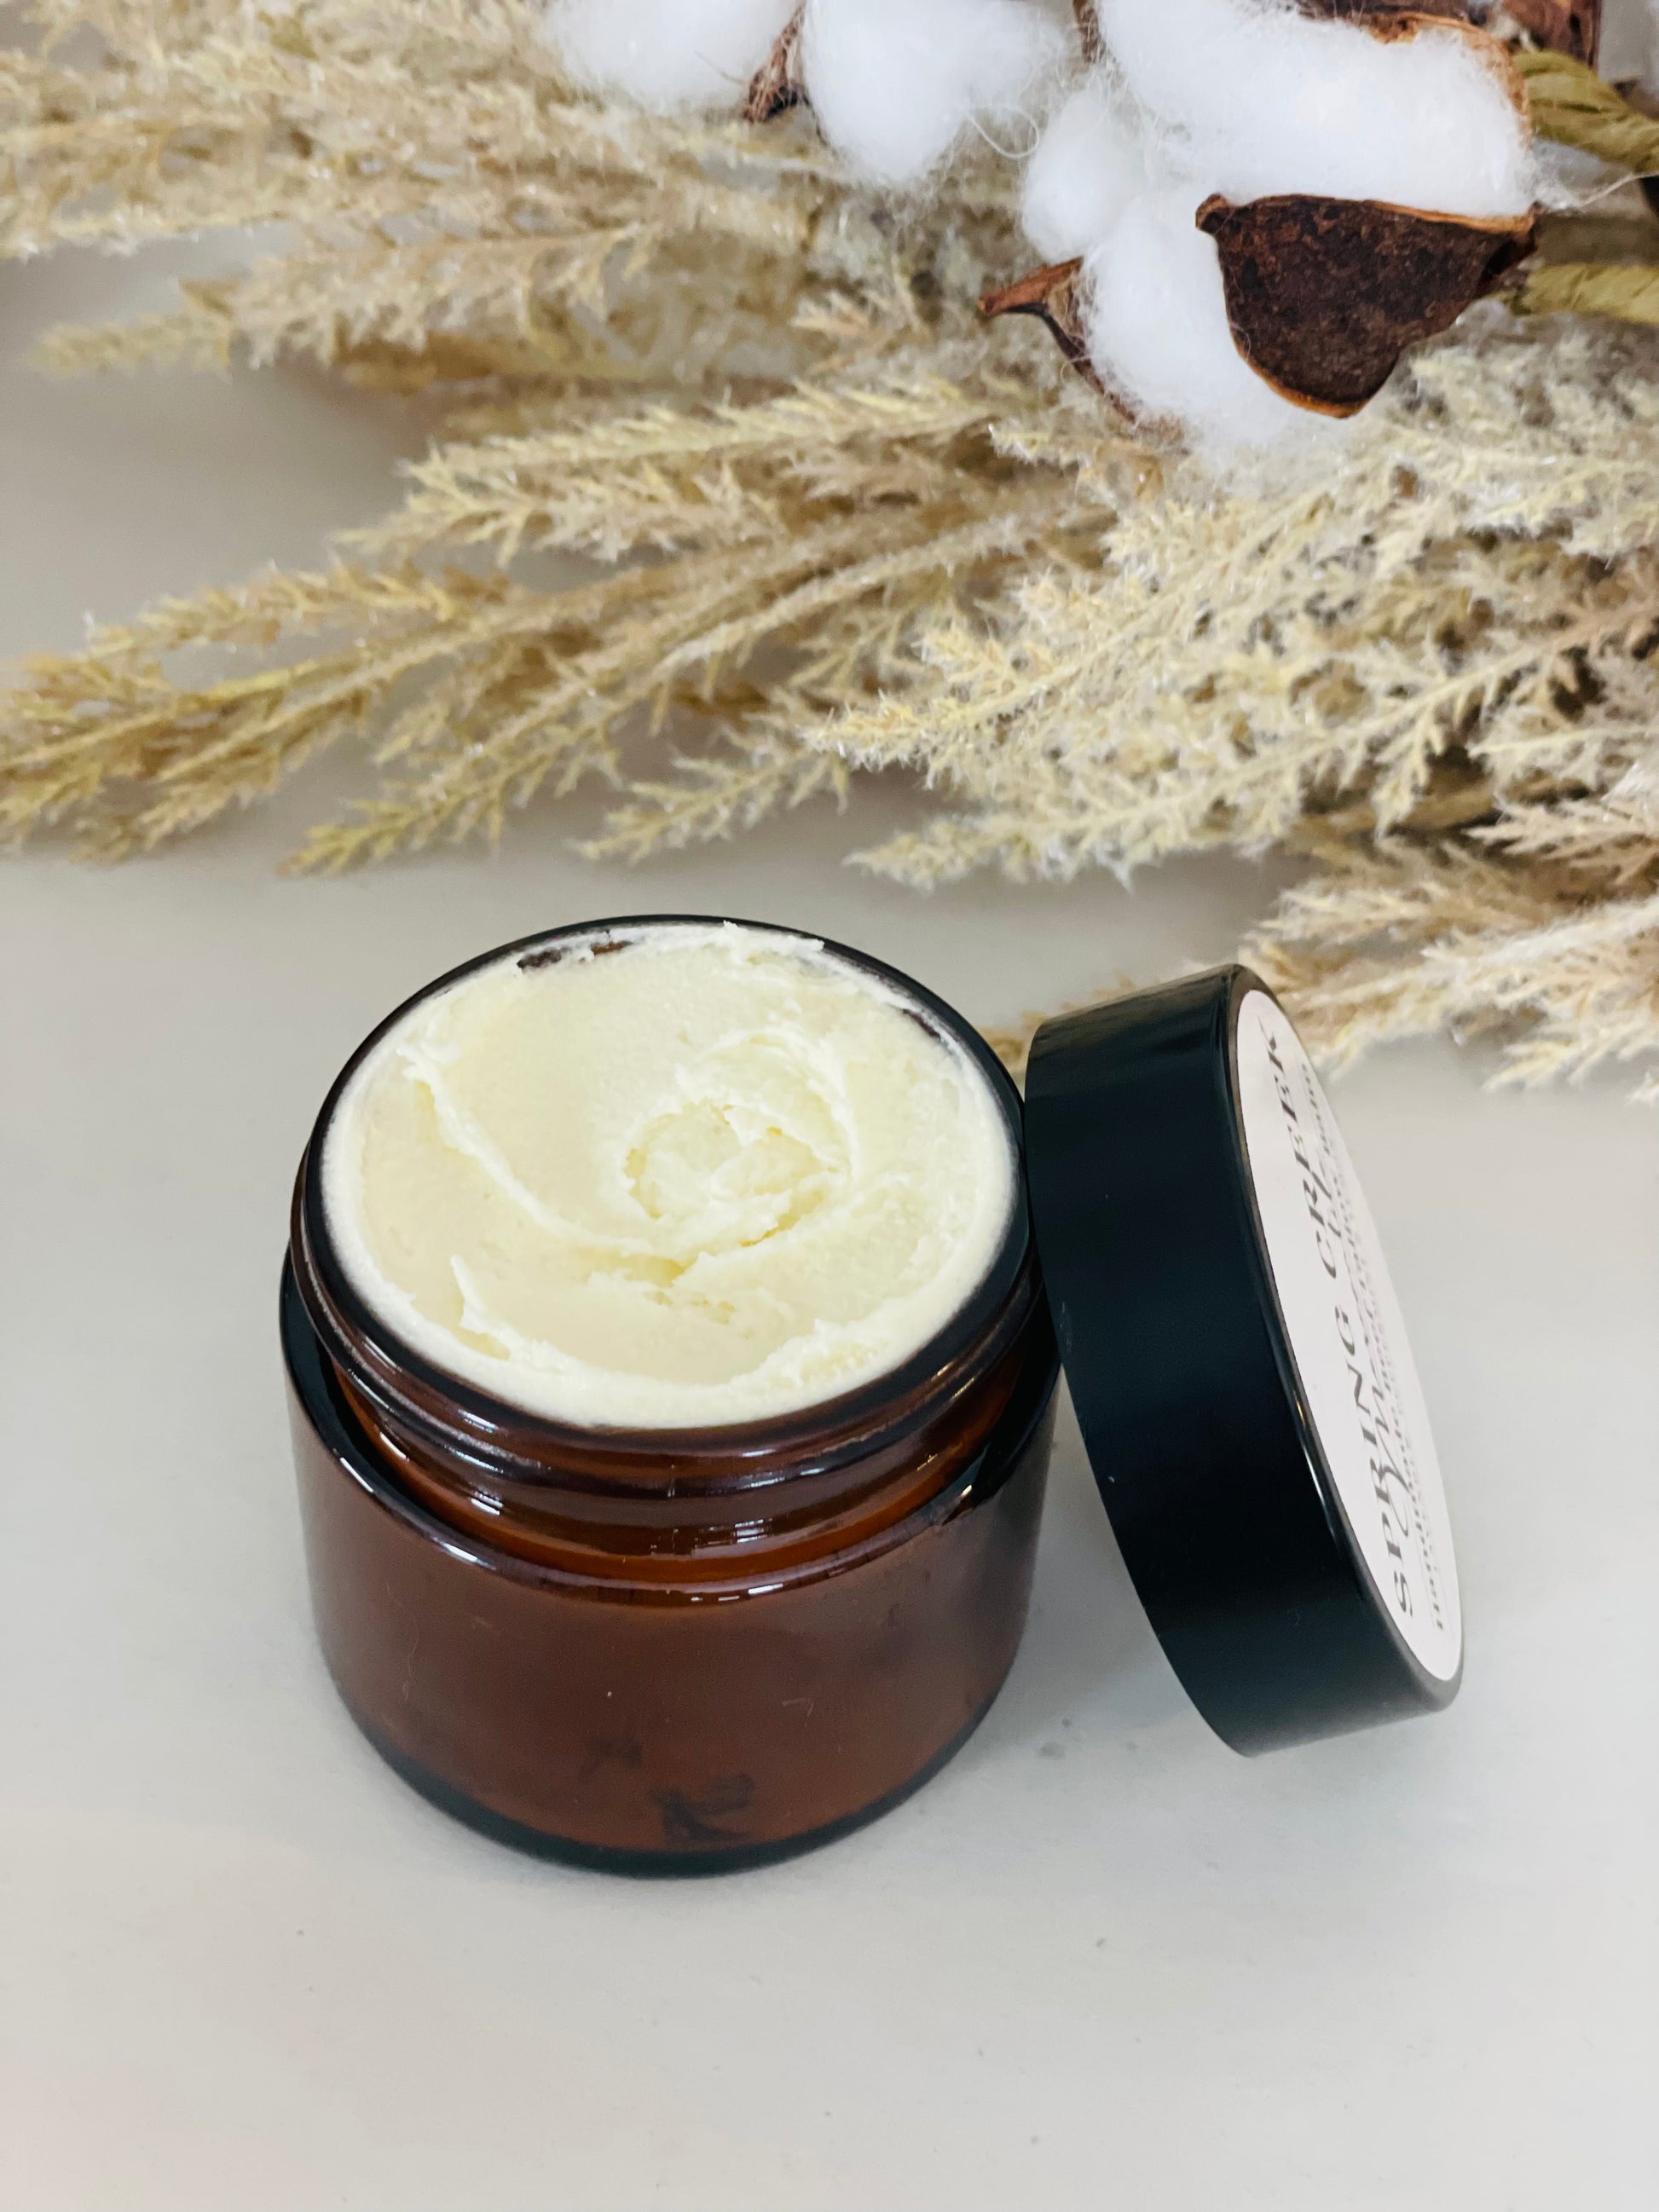 Whipped Tallow Balm | Frankincense